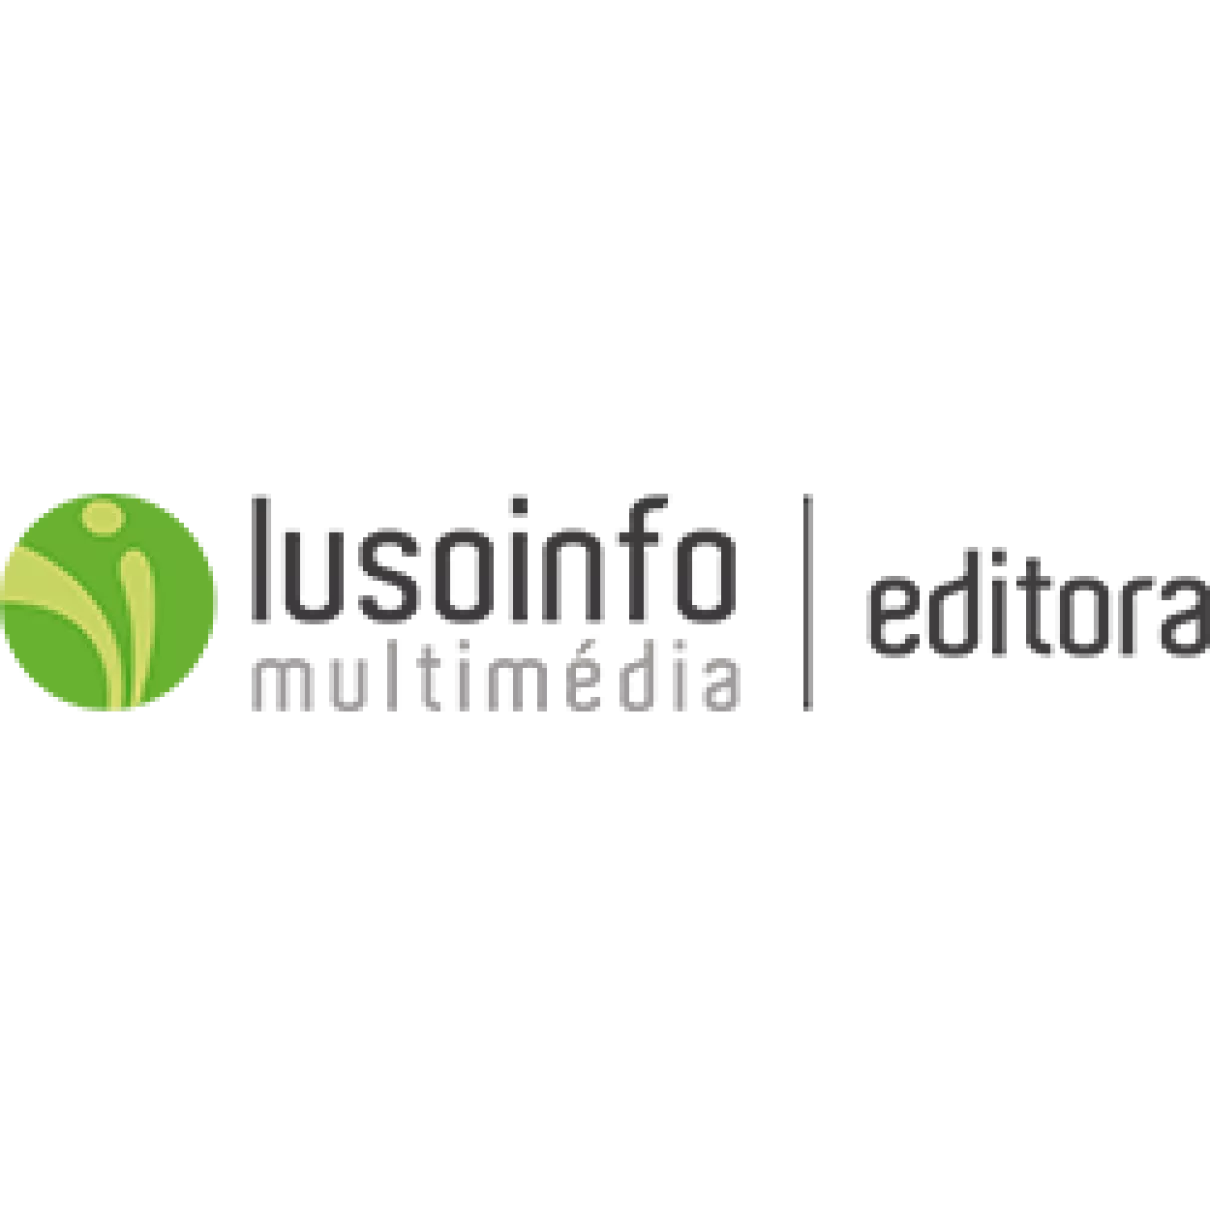 LusoInfo